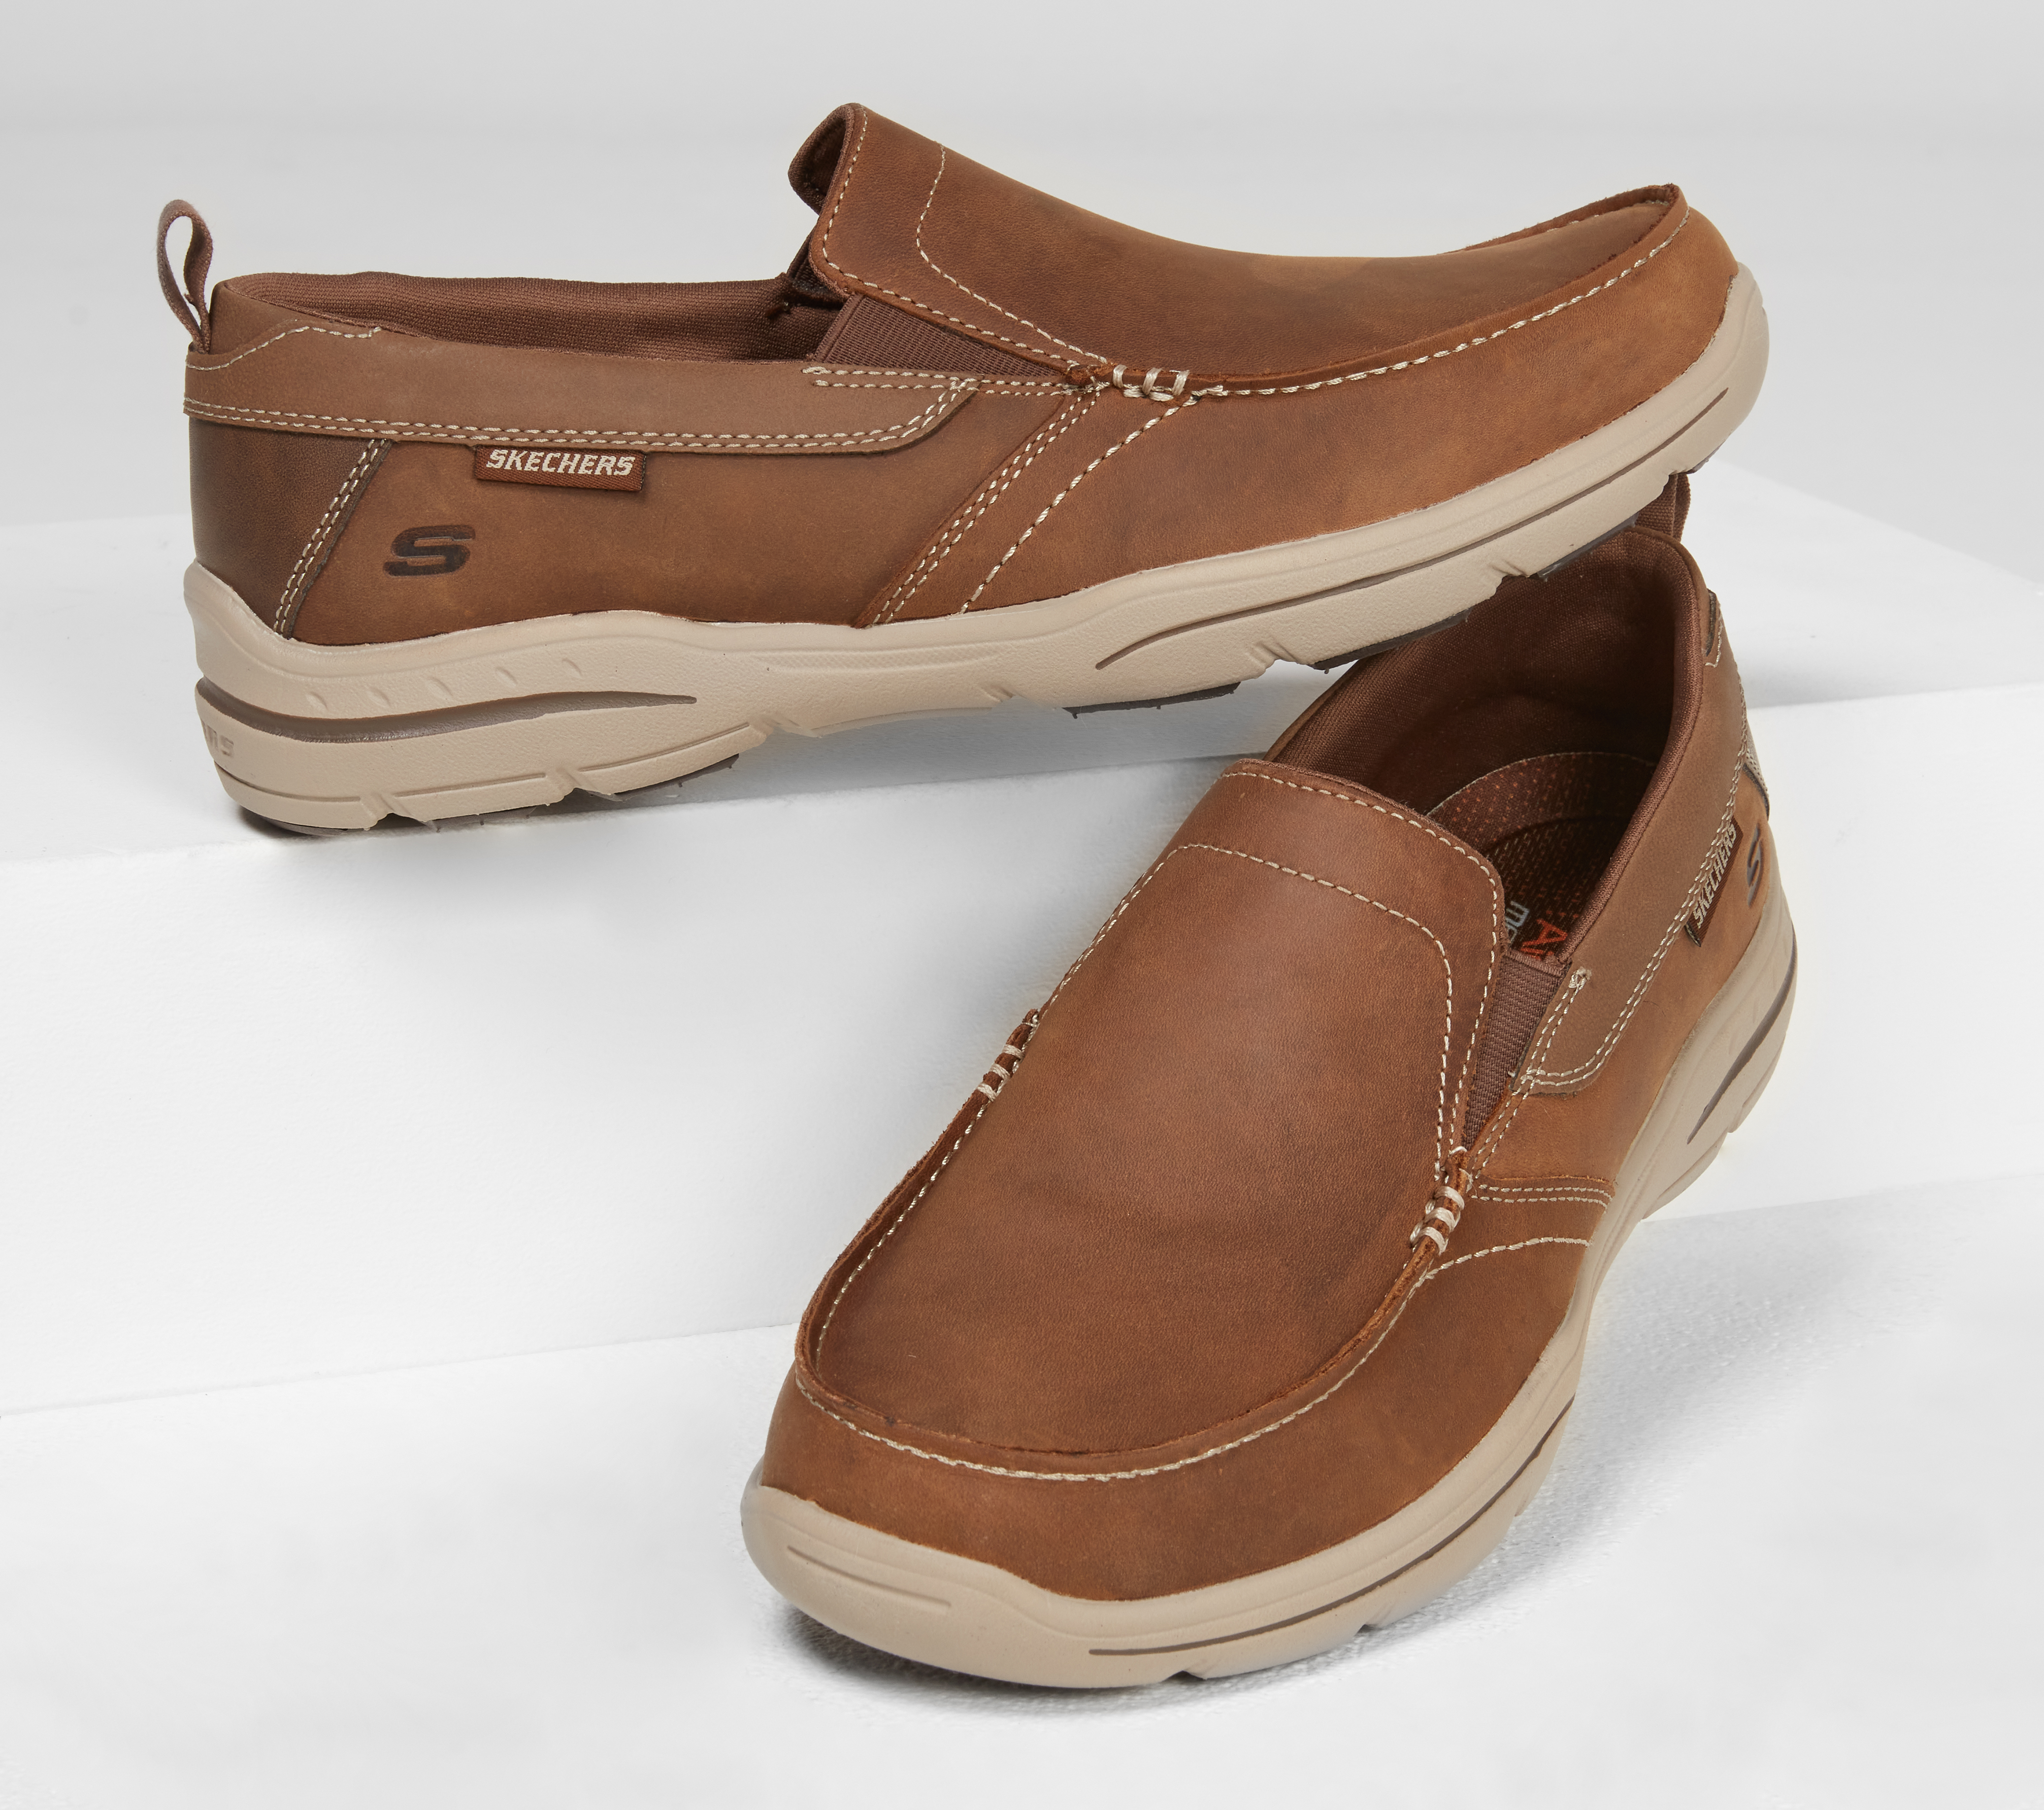 sketchers loafers